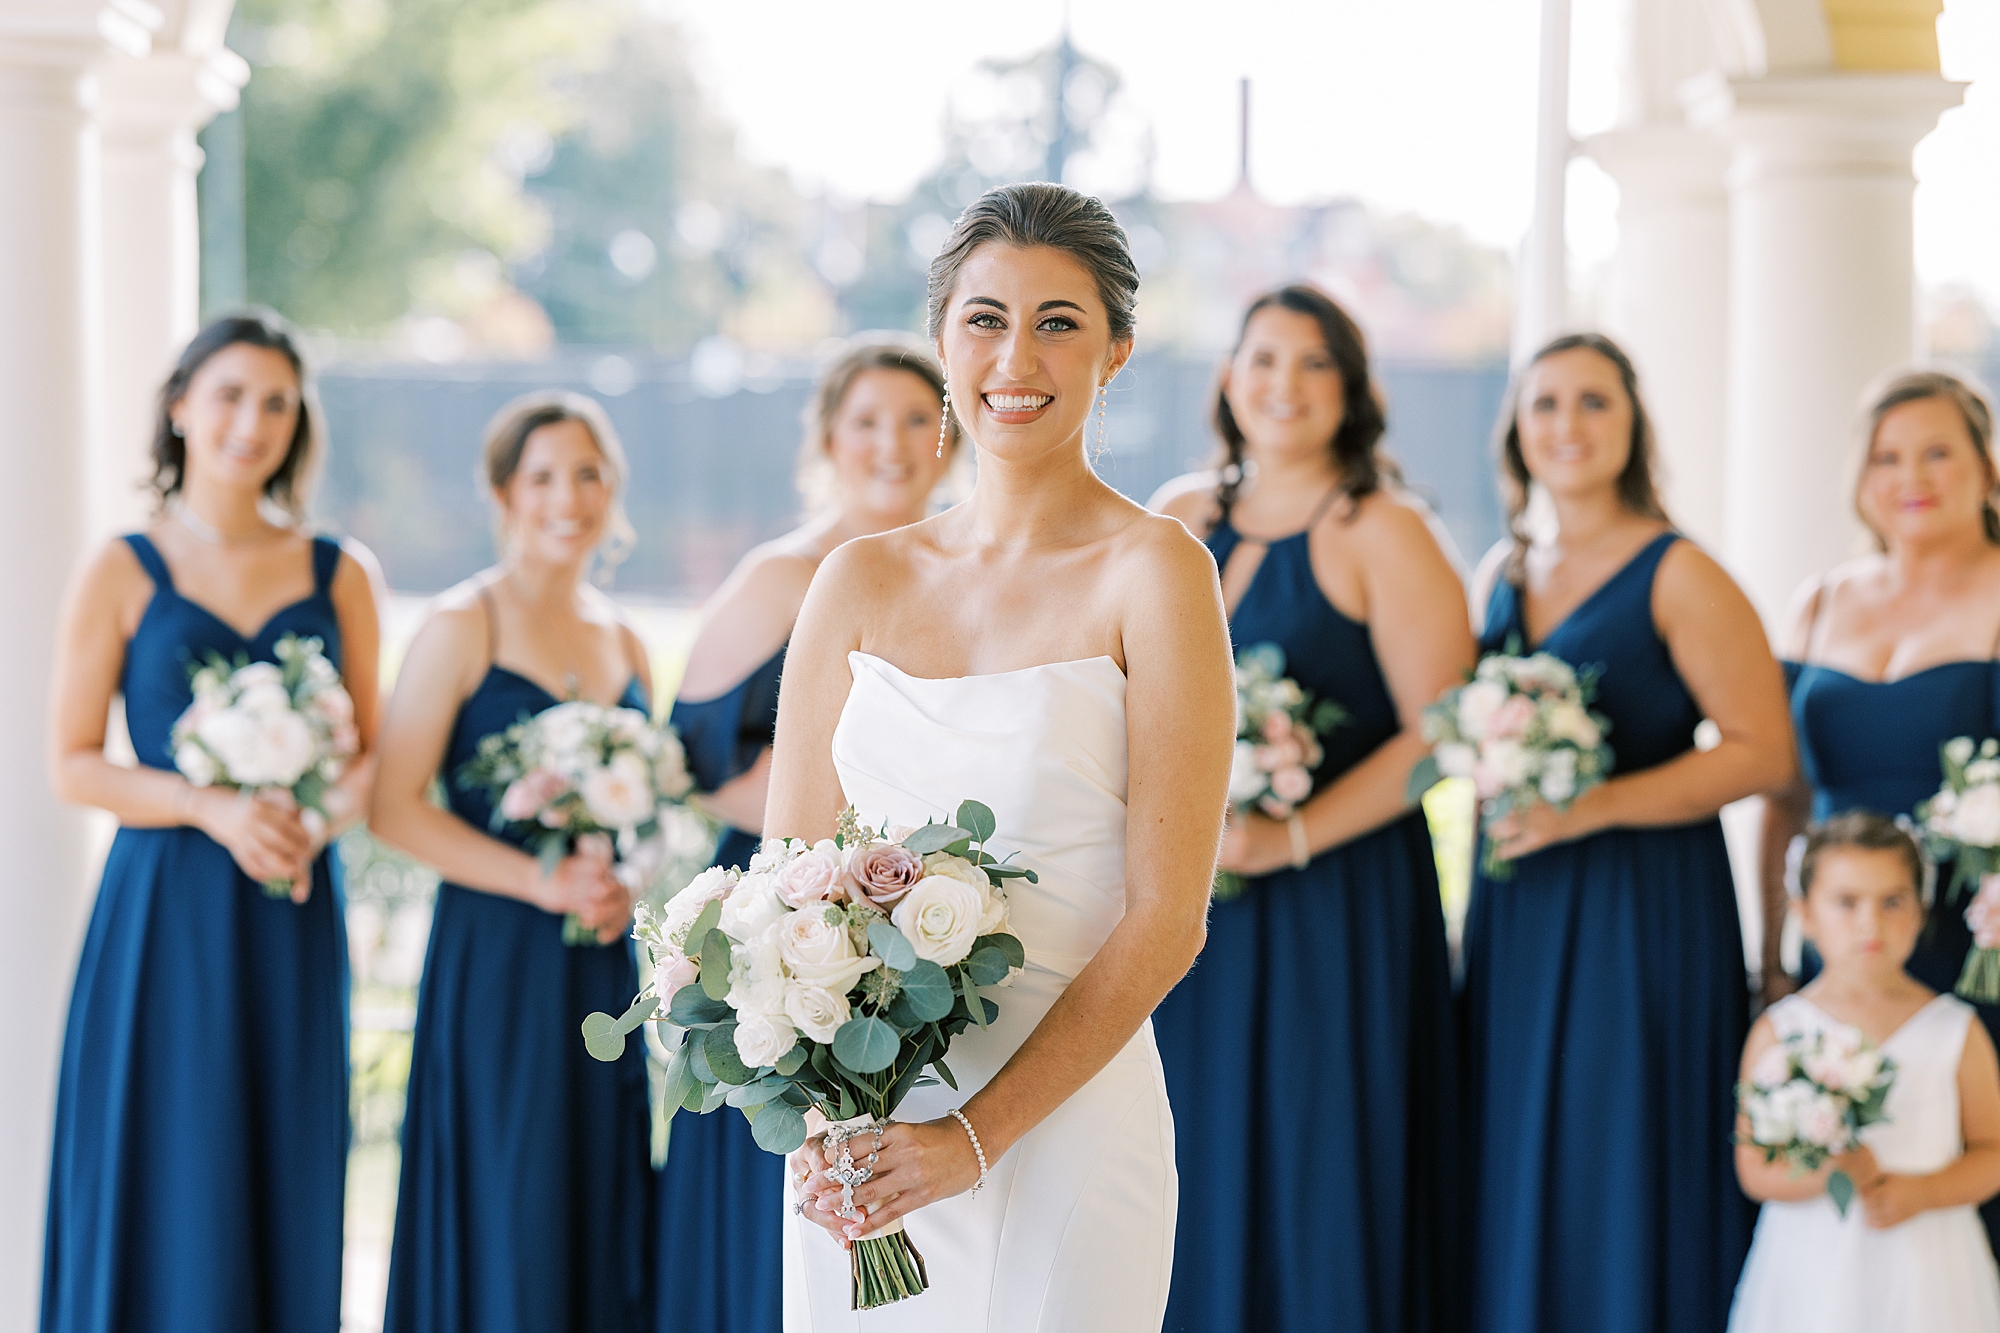 bride smiles holding bouquet of pastel flowers in front of bridesmaids in navy gowns 